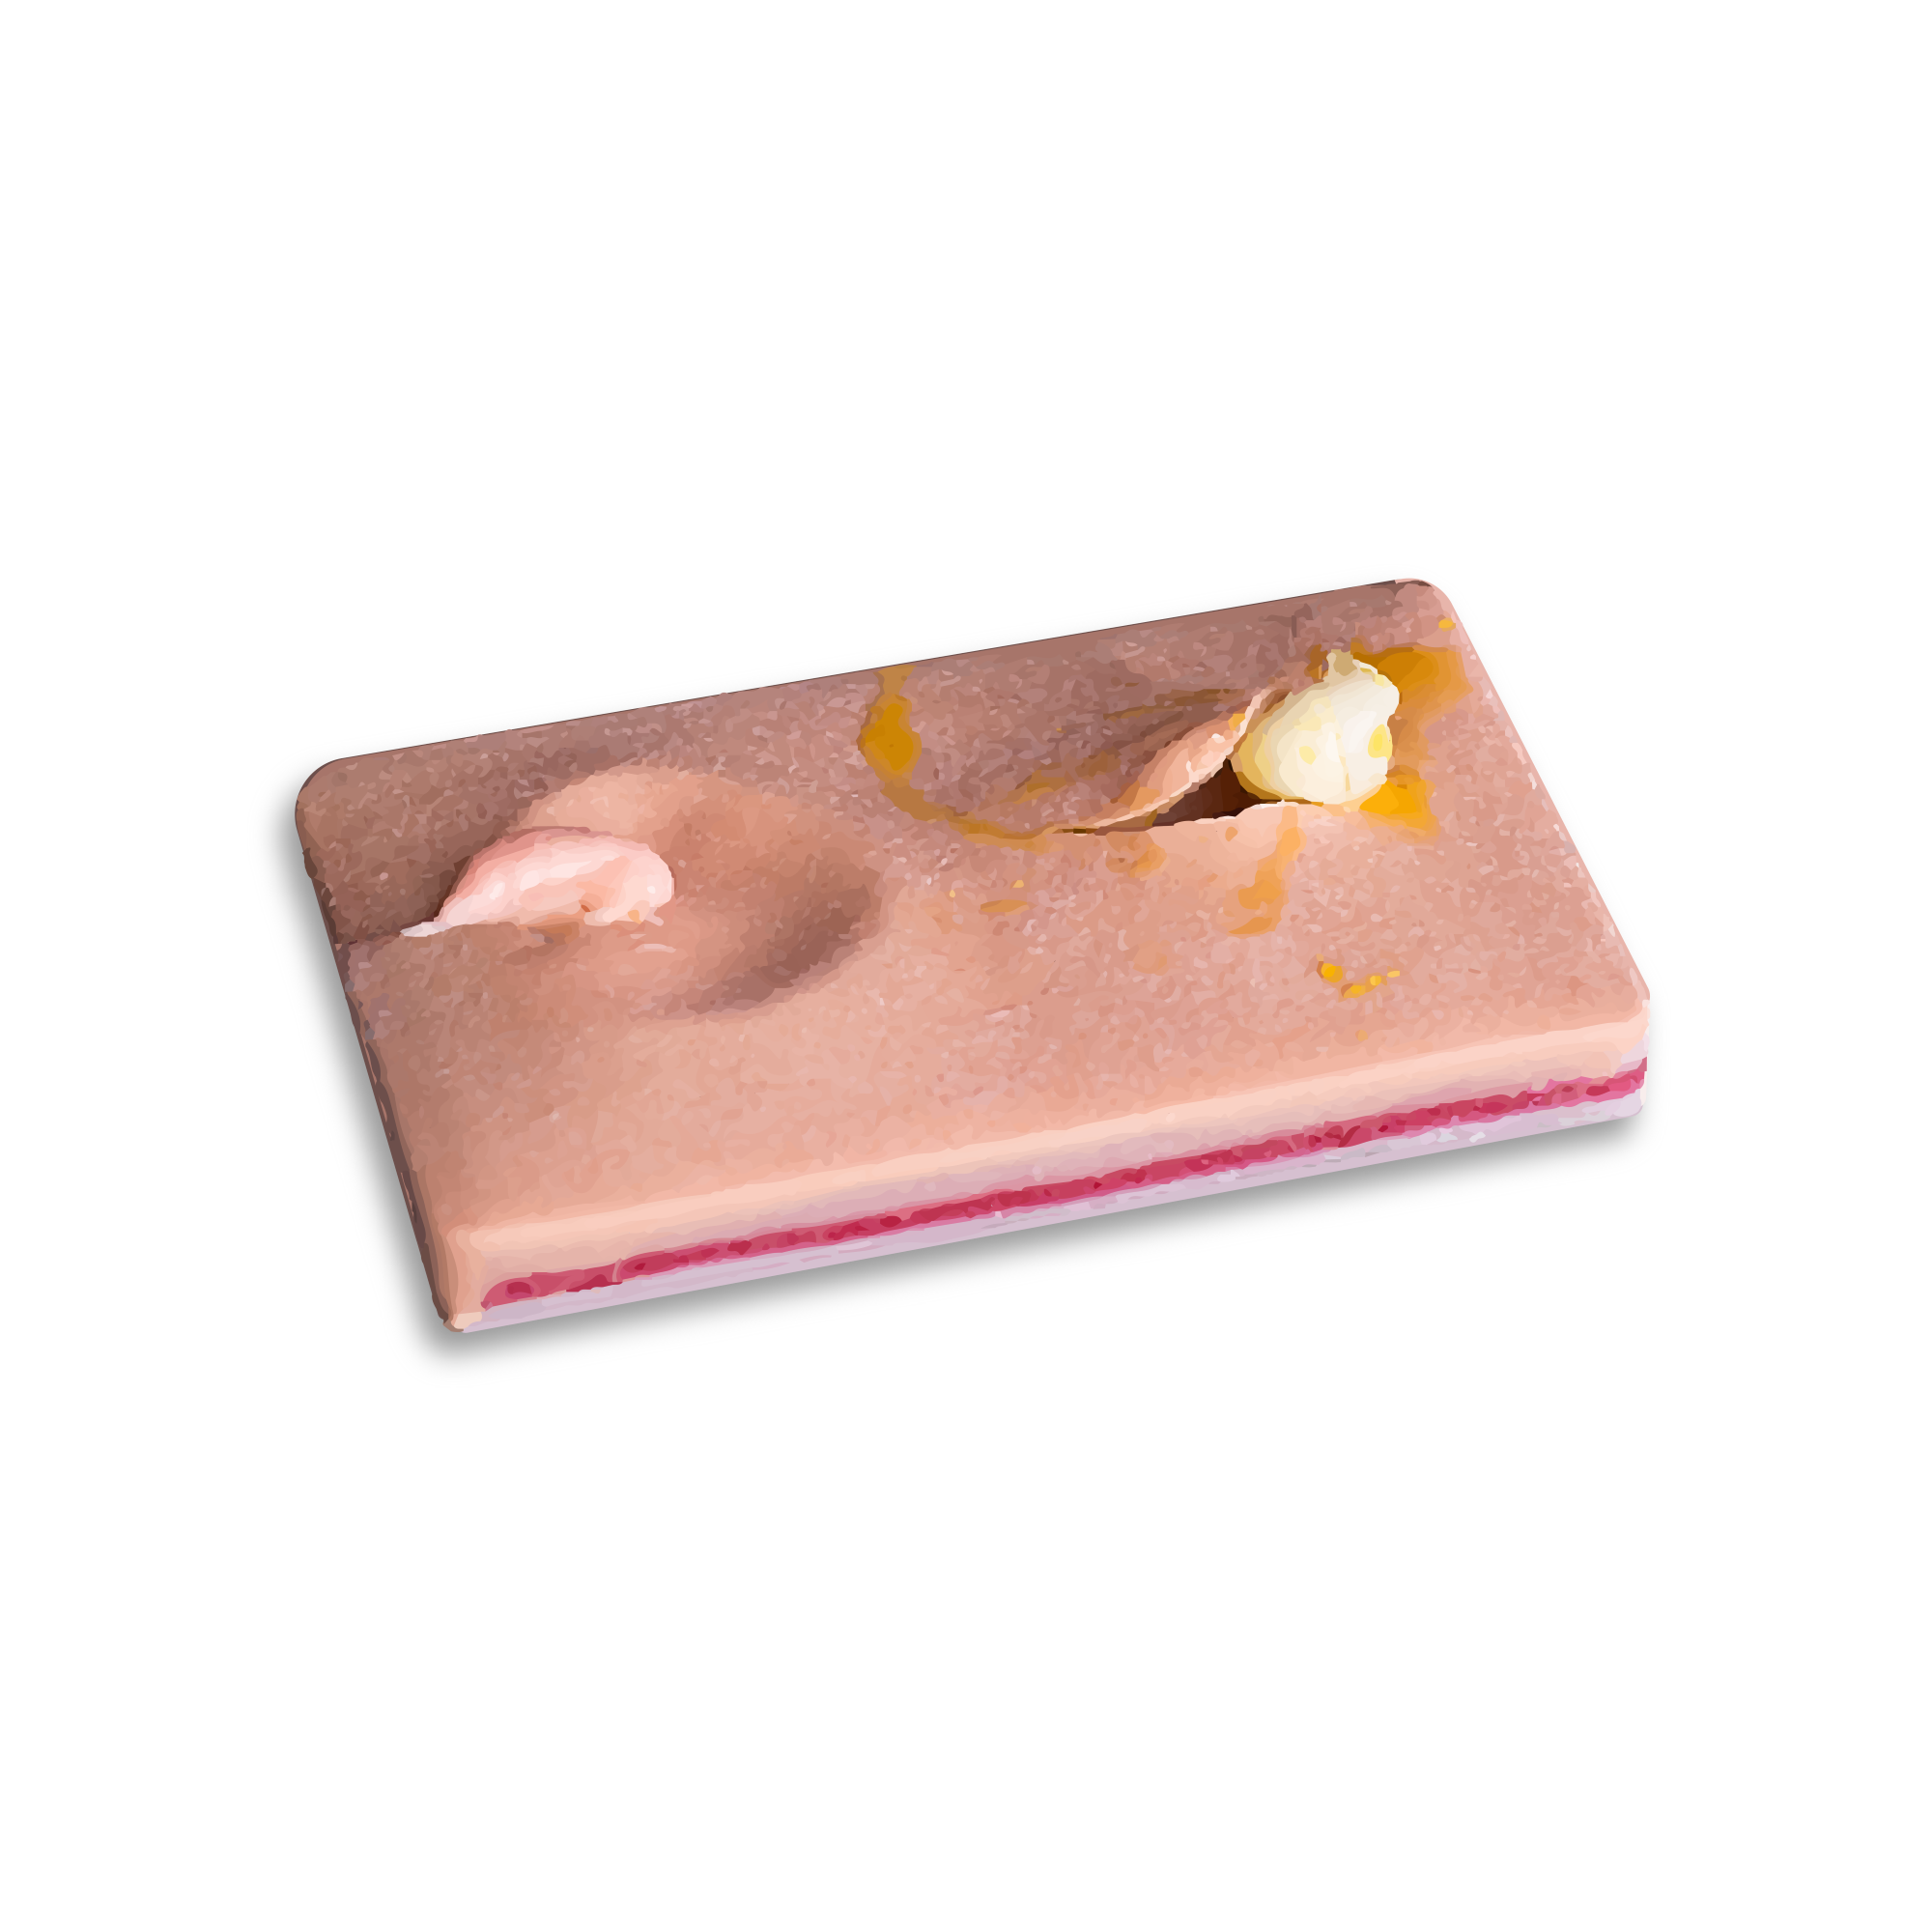 SurgiReal's I&D Suture Pad helps students learn how to incise and drain cysts and abscesses. Includes a simulated cyst that can burst and simulated puss to be removed from the pad, packed, and then sutured.